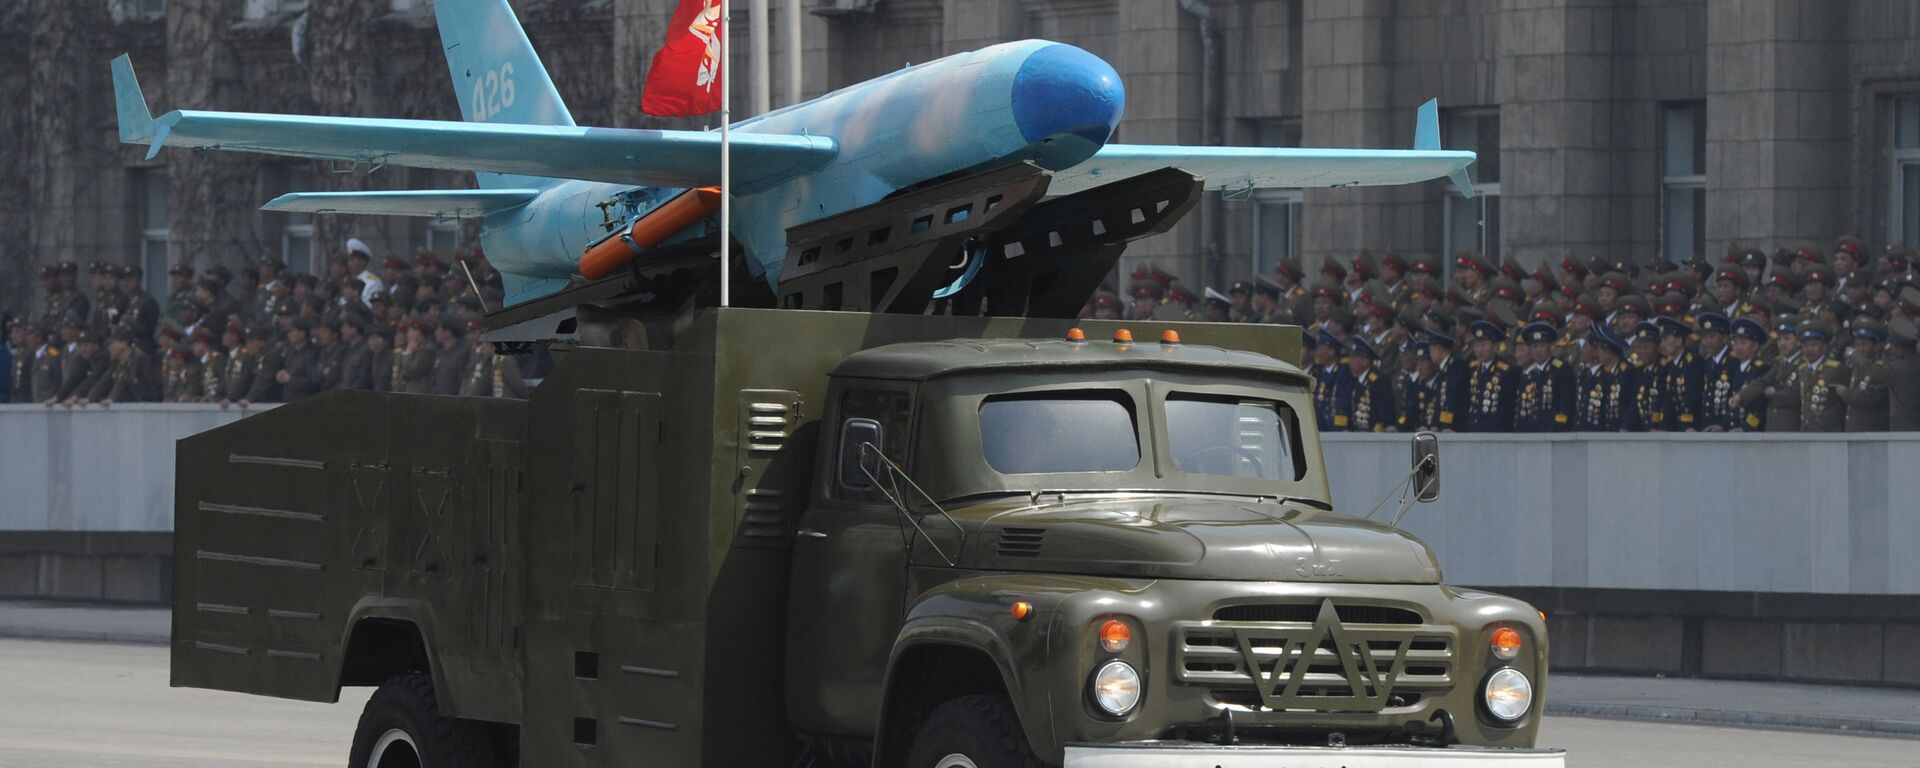 Zil-130 truck carrying a North Korean drone believed to be modeled on the US-made MQM-107D drone, at the military parade marking the 100th birthday of late North Korea founder Kim Il Sung in Pyongyang. April 15, 2012. - Sputnik International, 1920, 05.01.2023